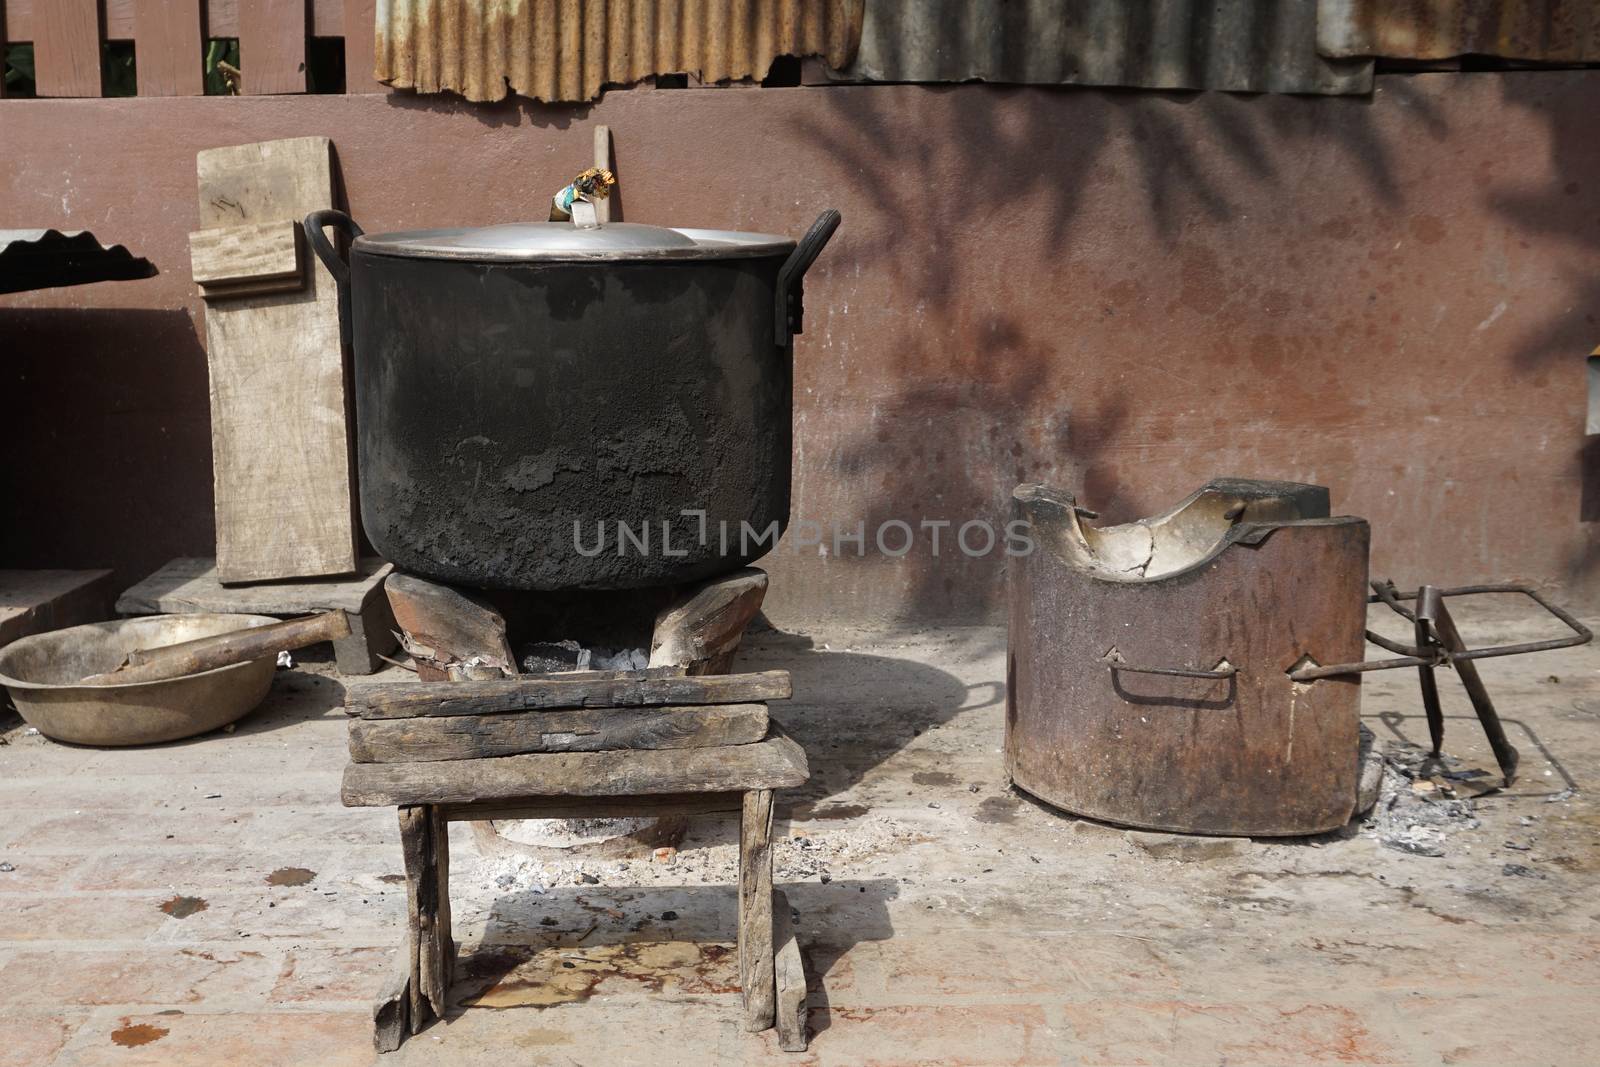 Local stove kitchen outdoor by polarbearstudio